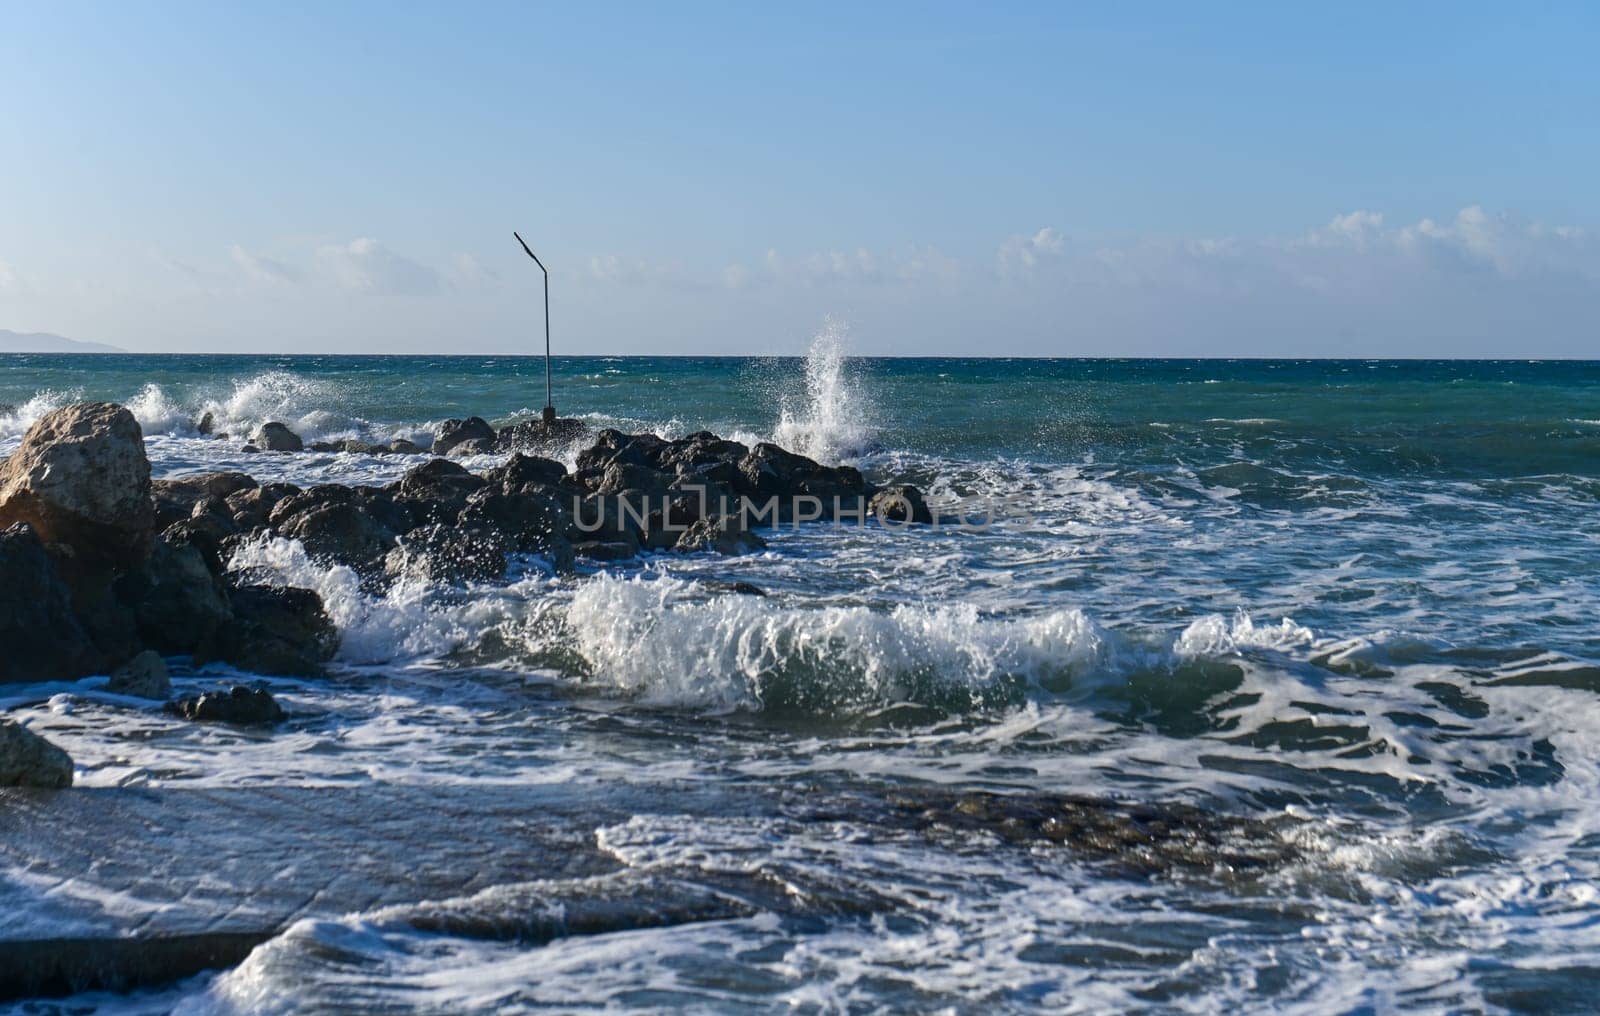 waves of the Mediterranean sea in winter on the island of Cyprus 1 by Mixa74